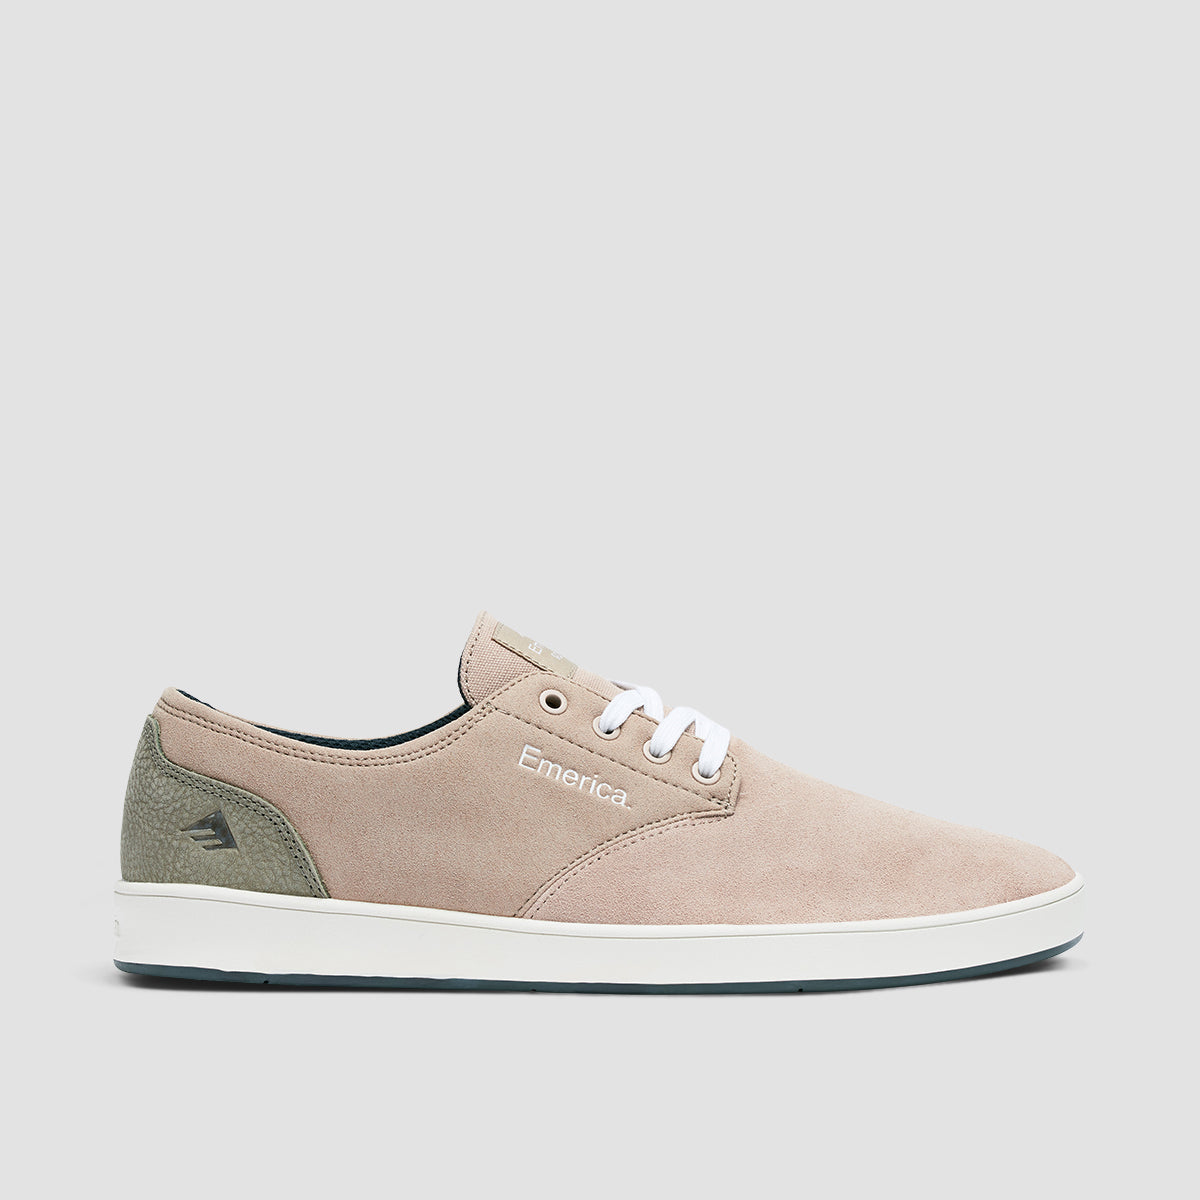 Emerica The Romero Laced Shoes Beige/Grey/White